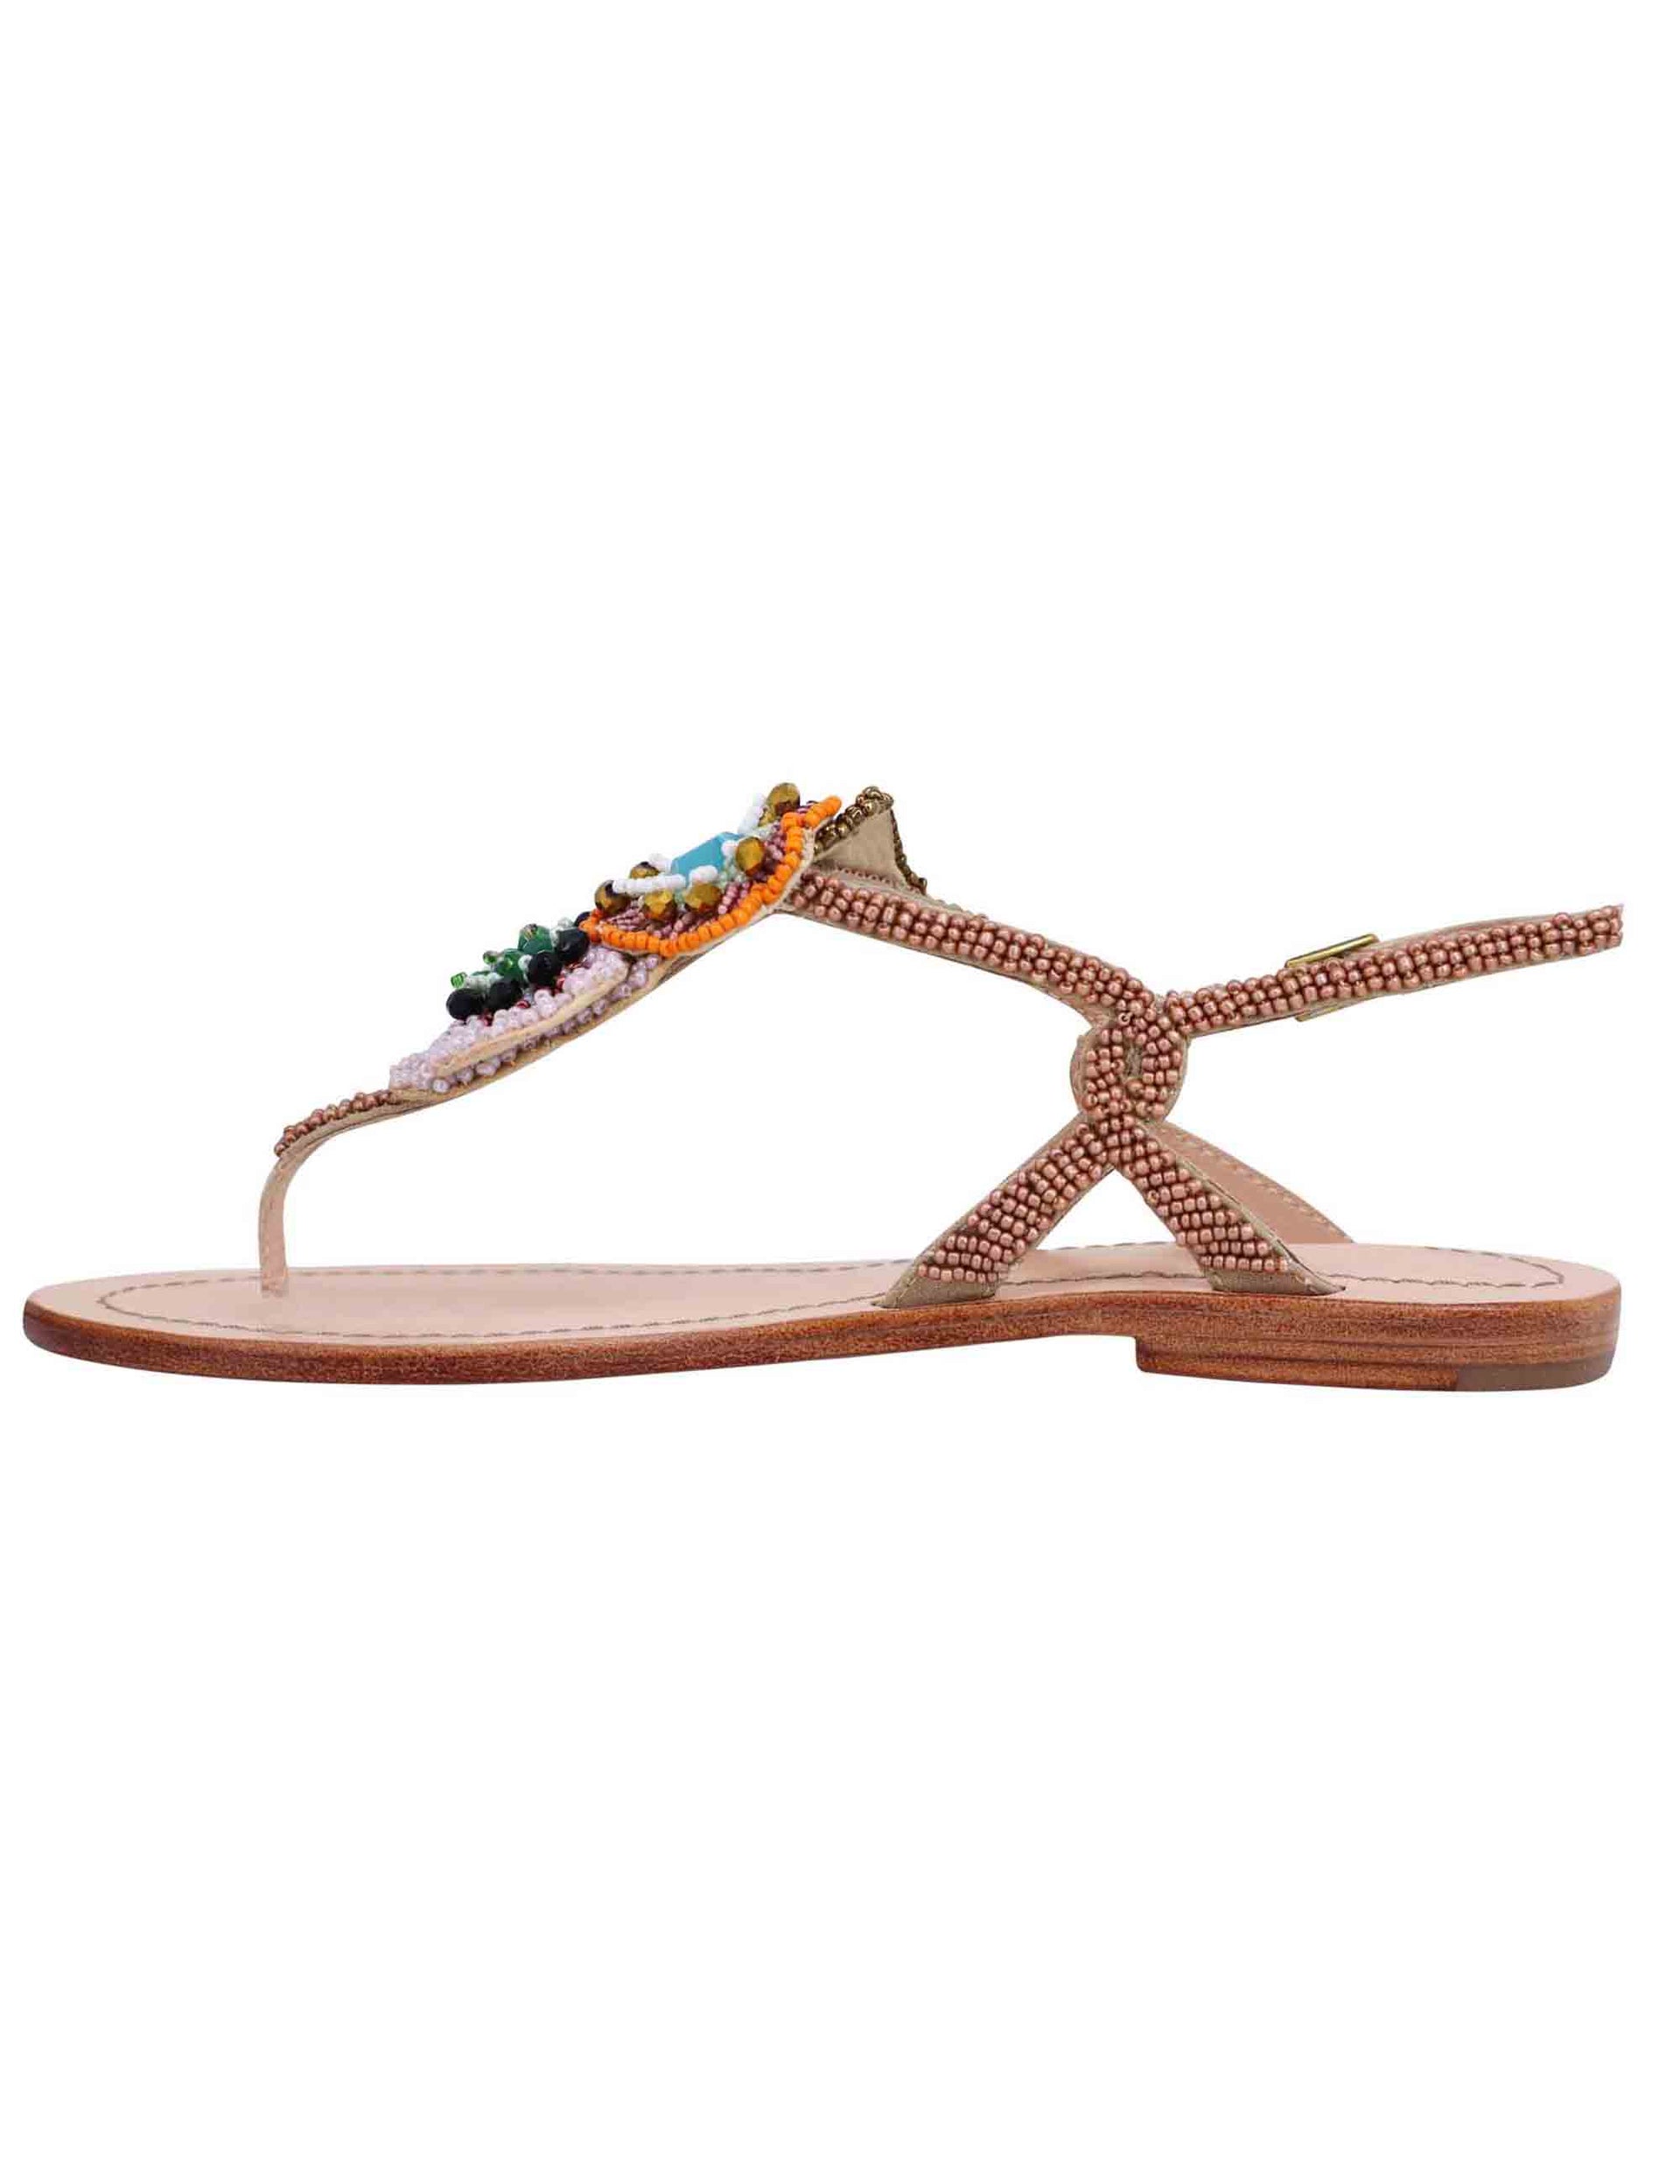 Women's flat flip-flop sandals in pink and multi beads with leather sole